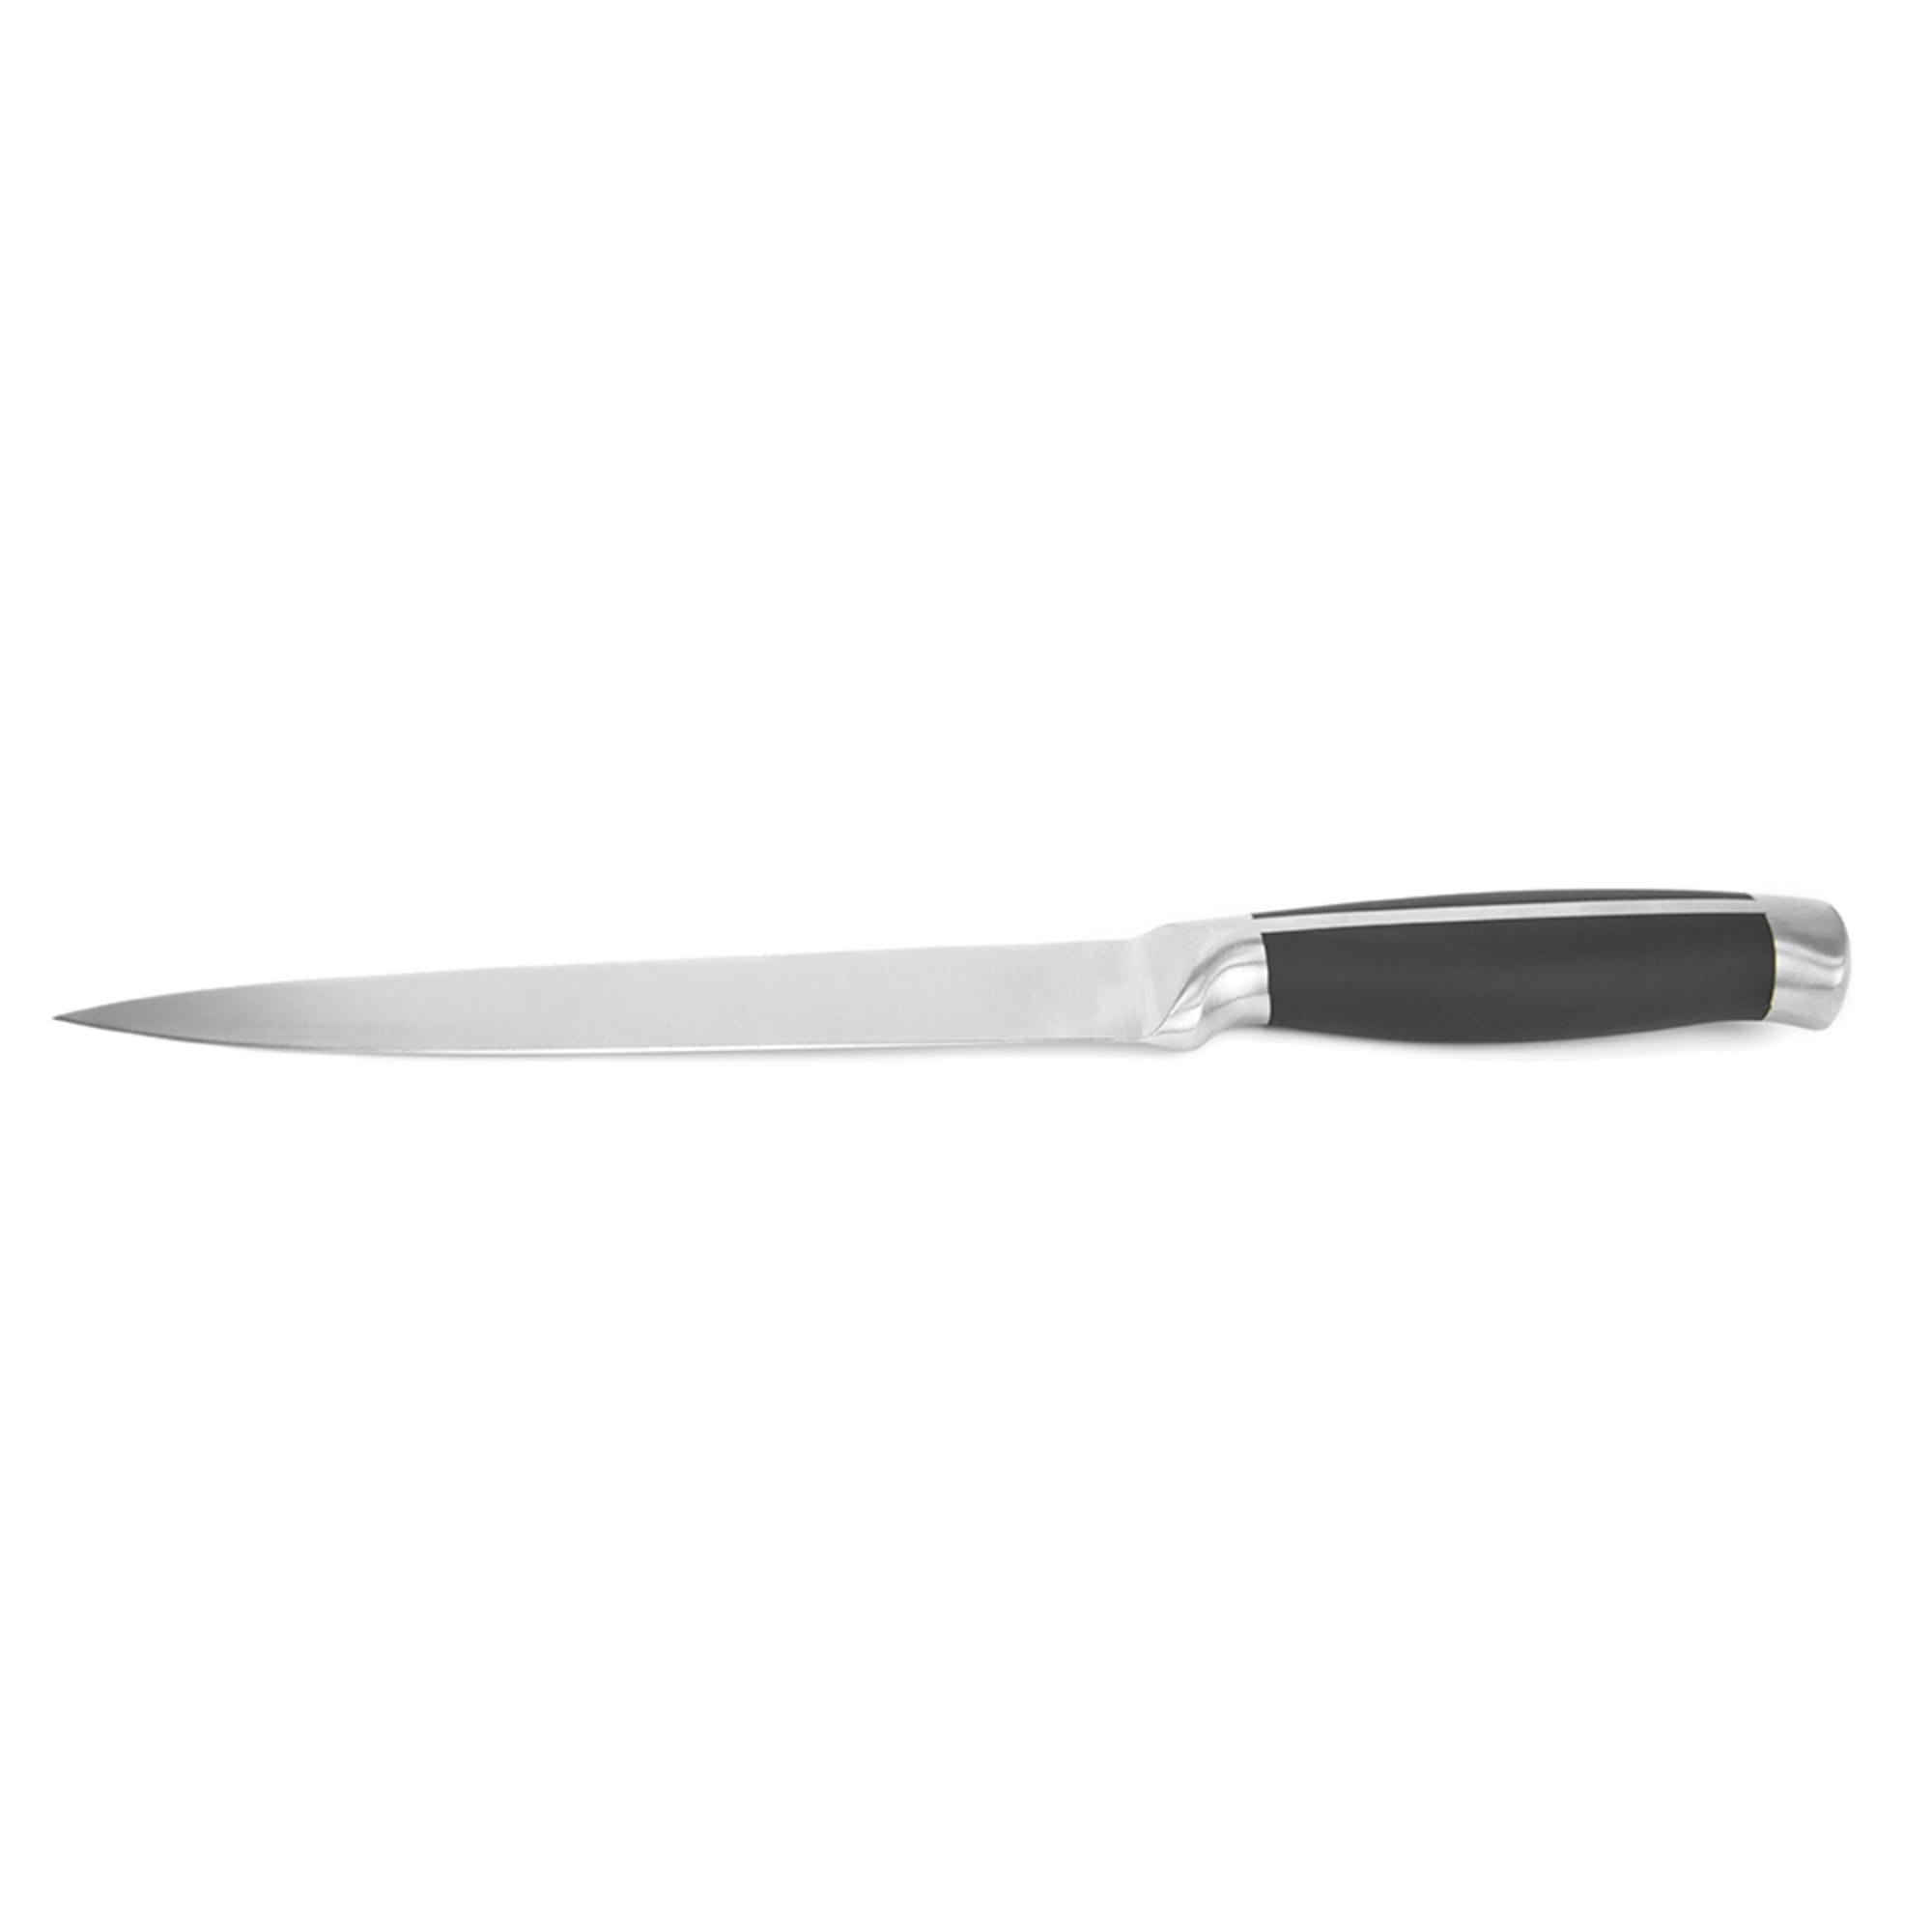 Home Basics Continental Collection 8" Slicing Knife $4.00 EACH, CASE PACK OF 24